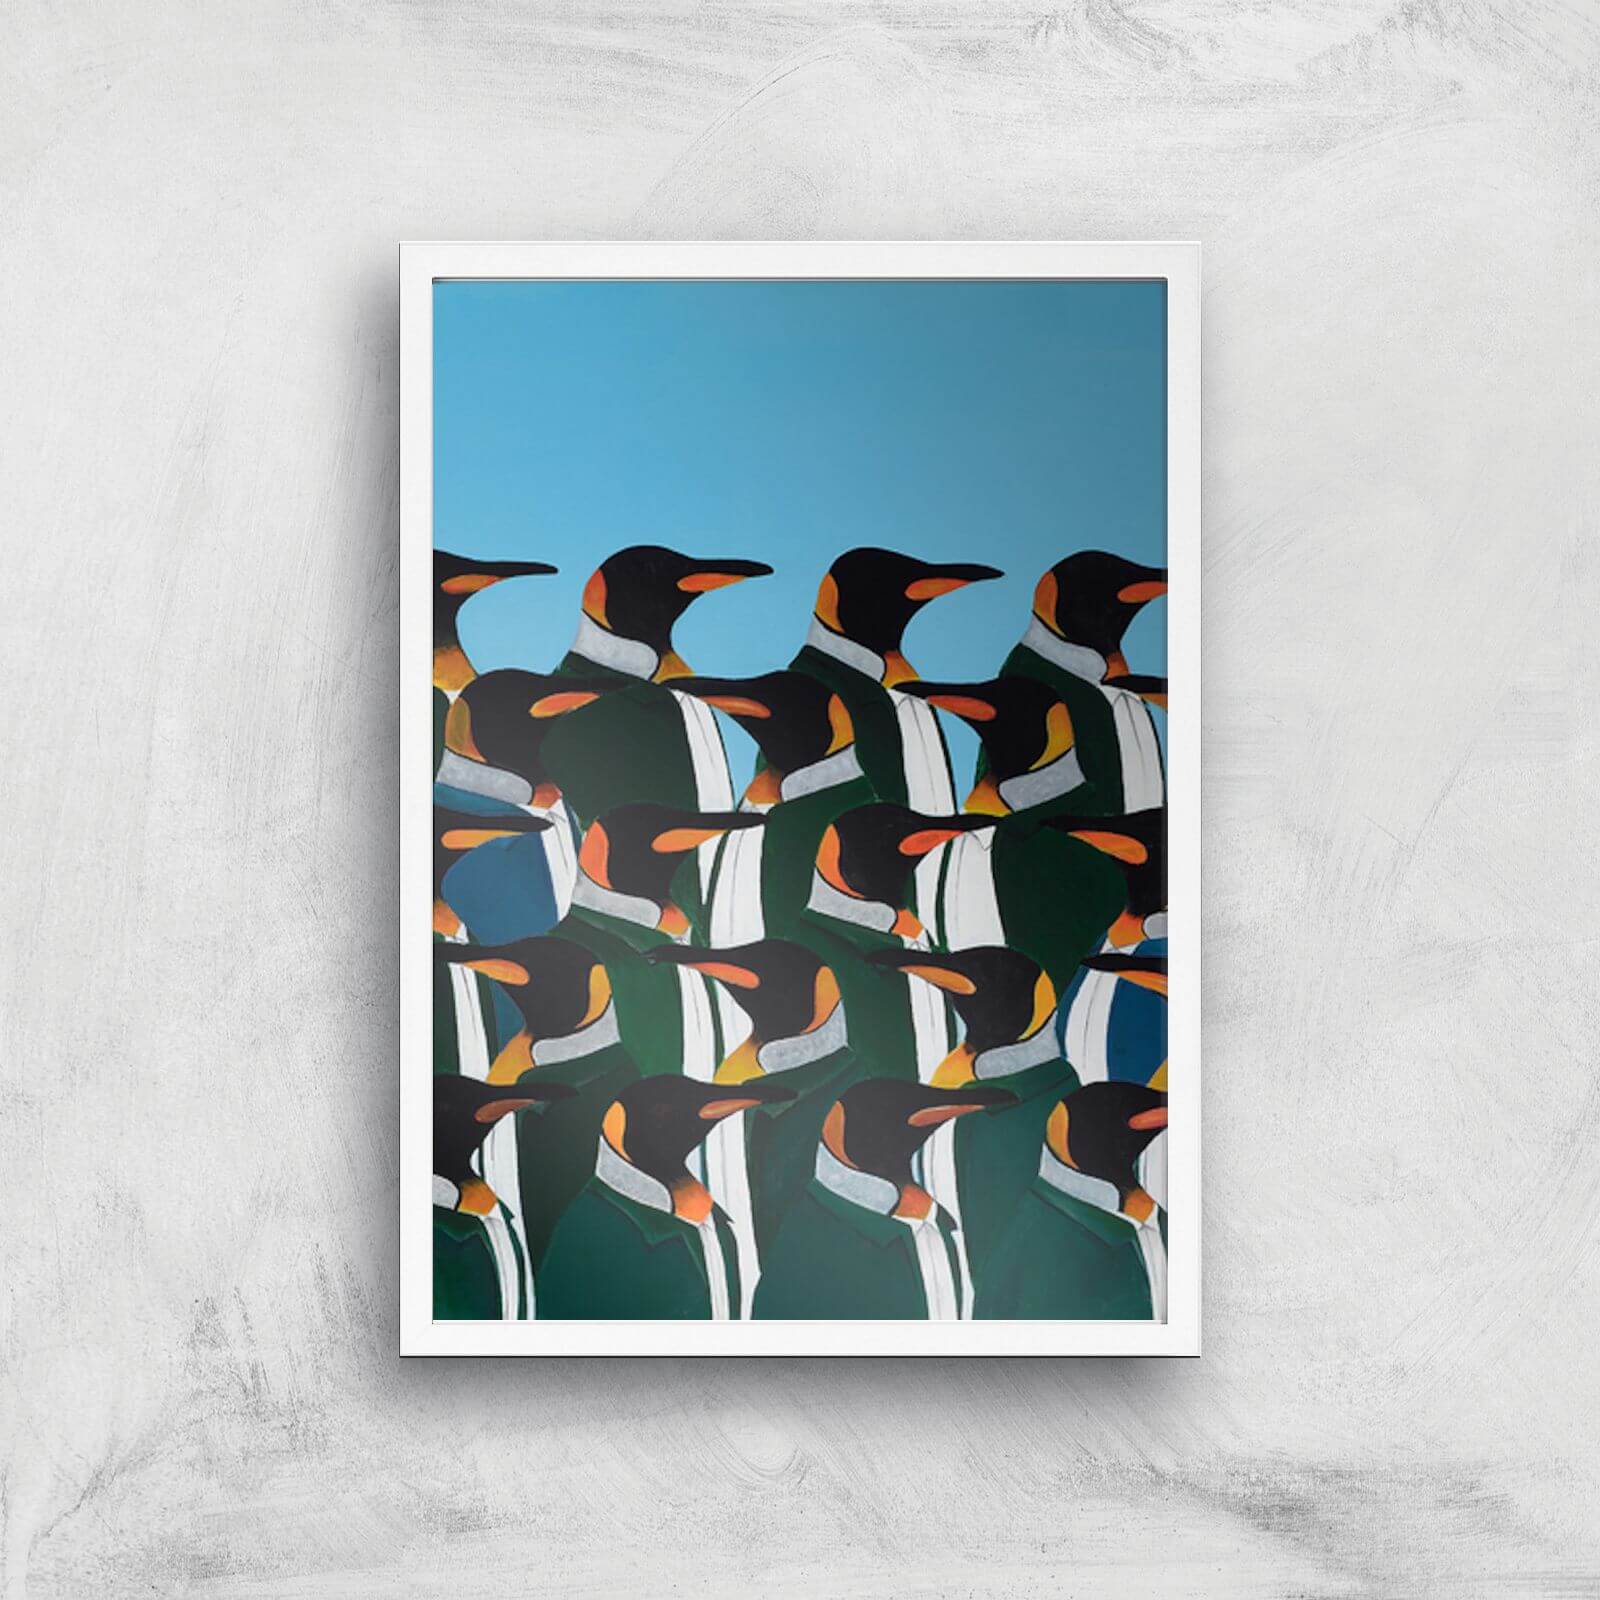 Penguins In Suits Giclee Art Print - A3 - White Frame